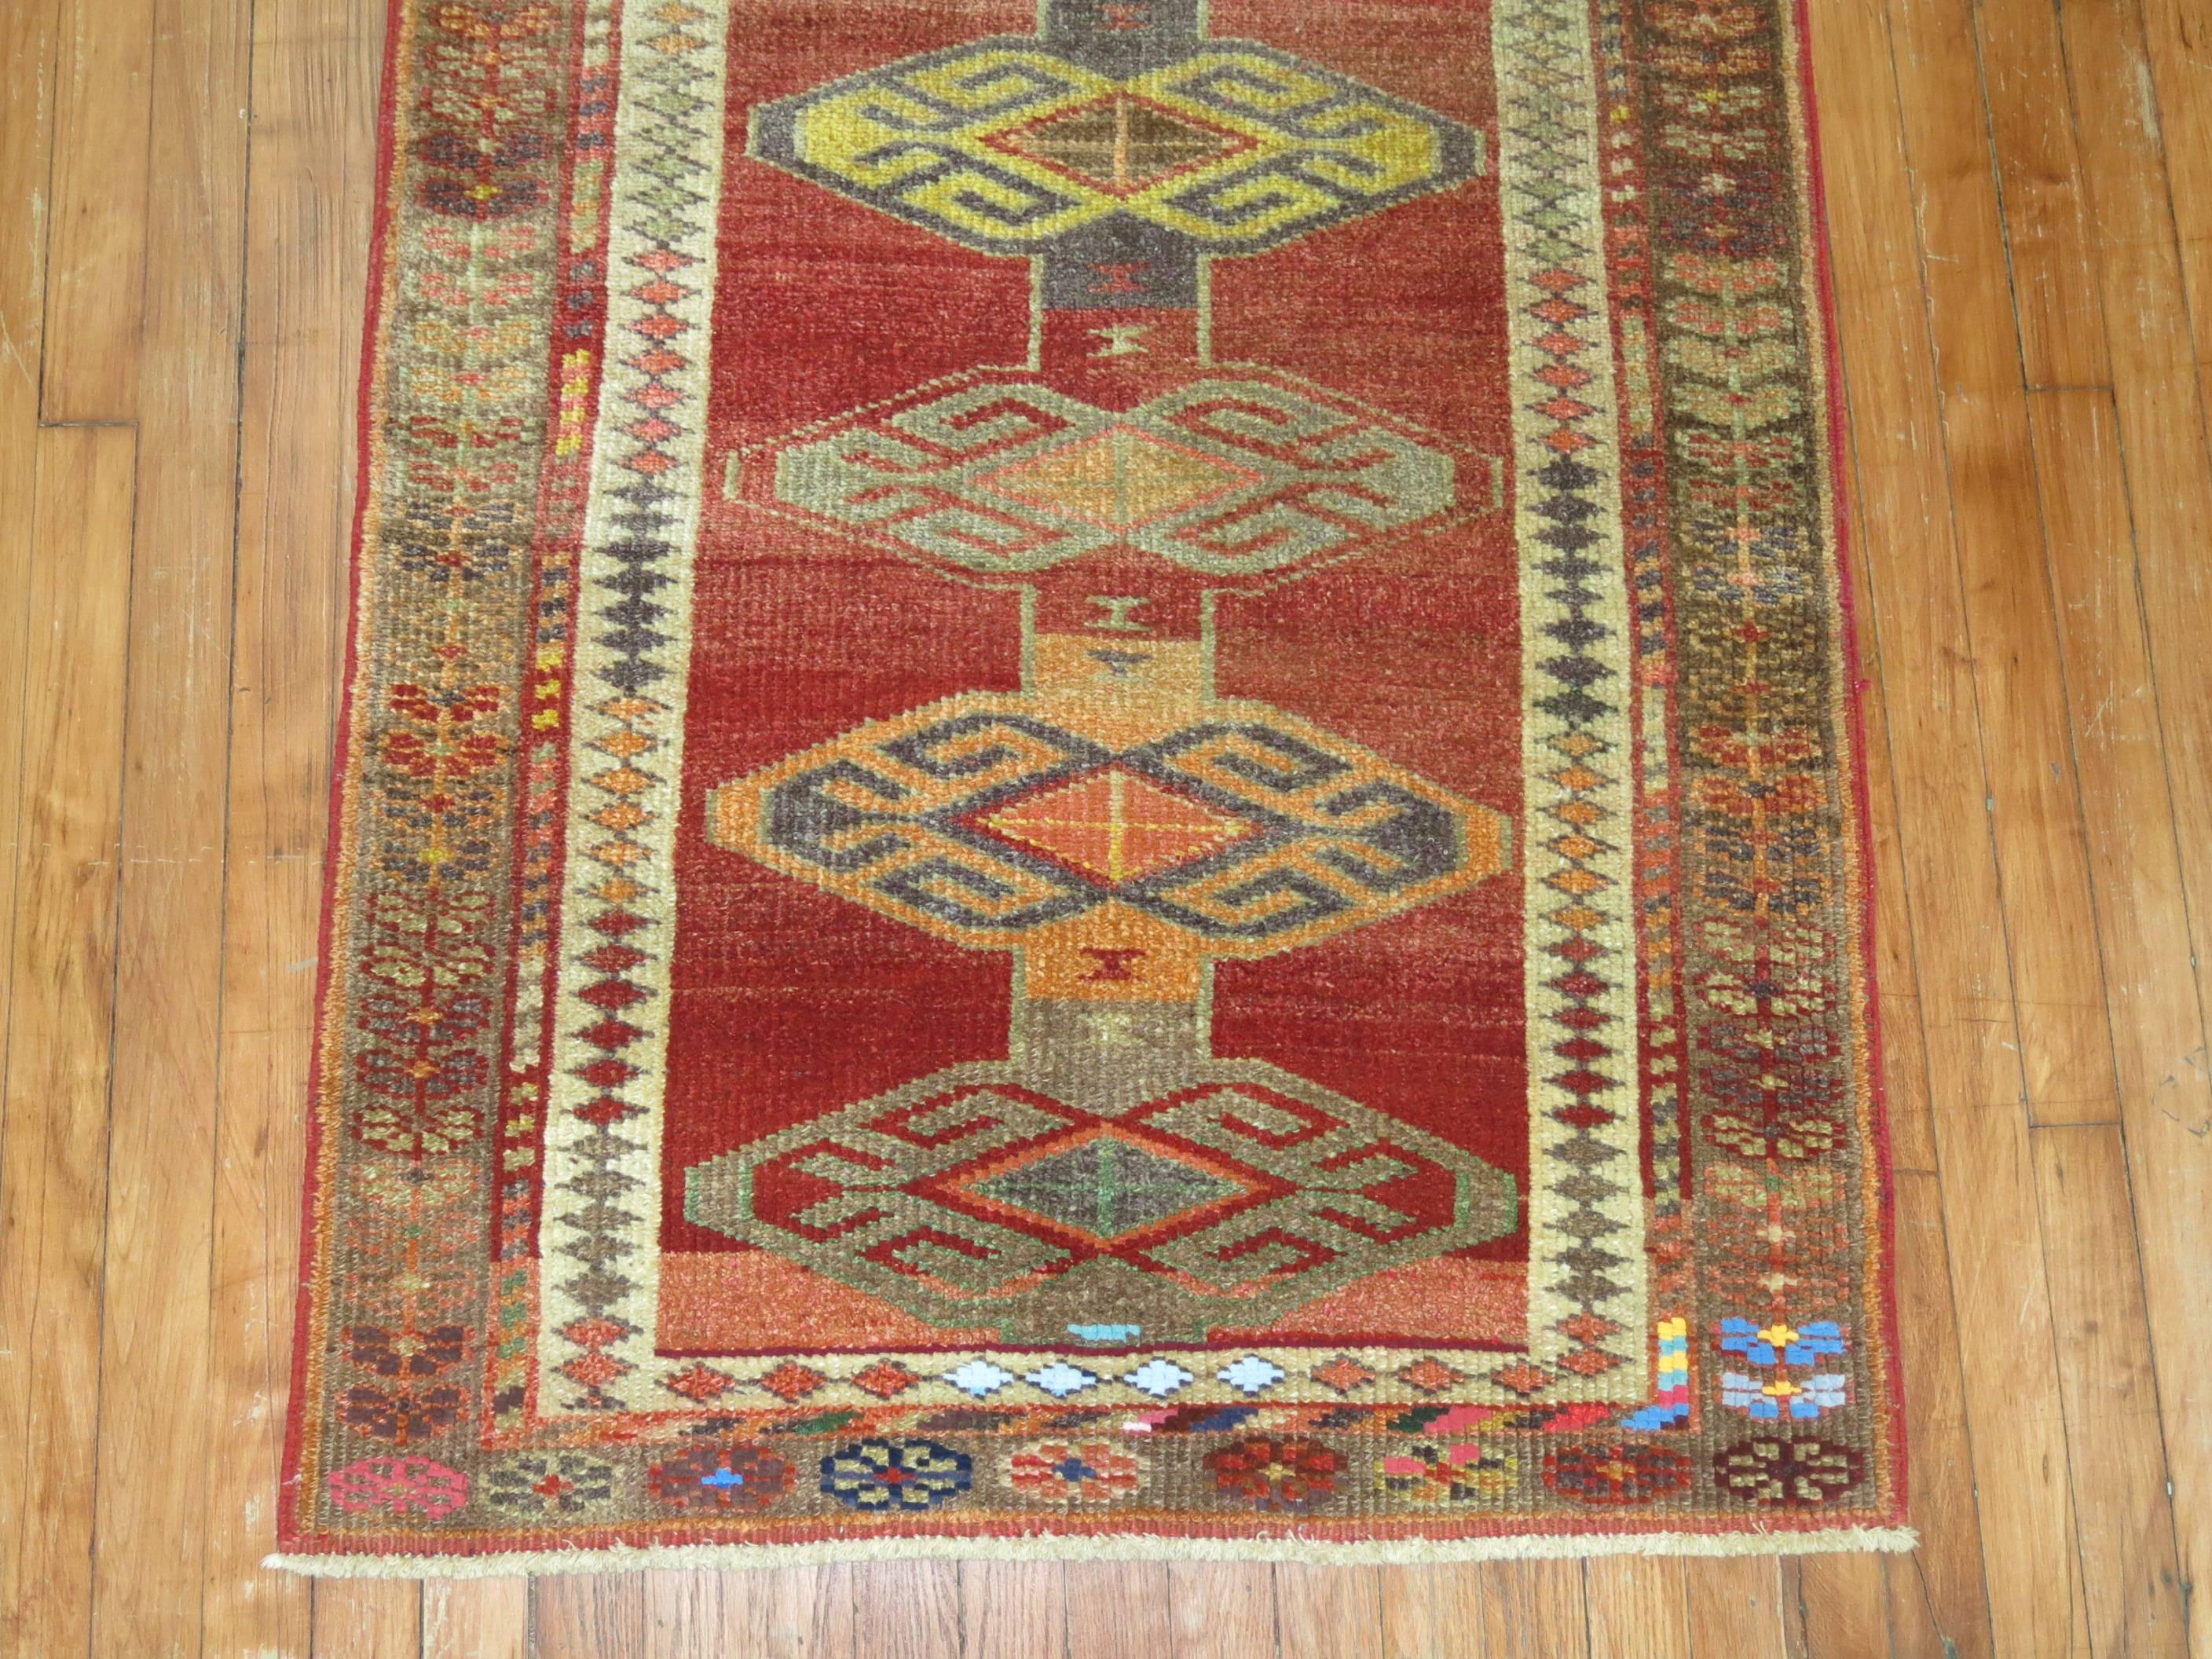 A colorful one-of-a-kind Armenian Runner from the 20th century.

2'11'' x 11'1''